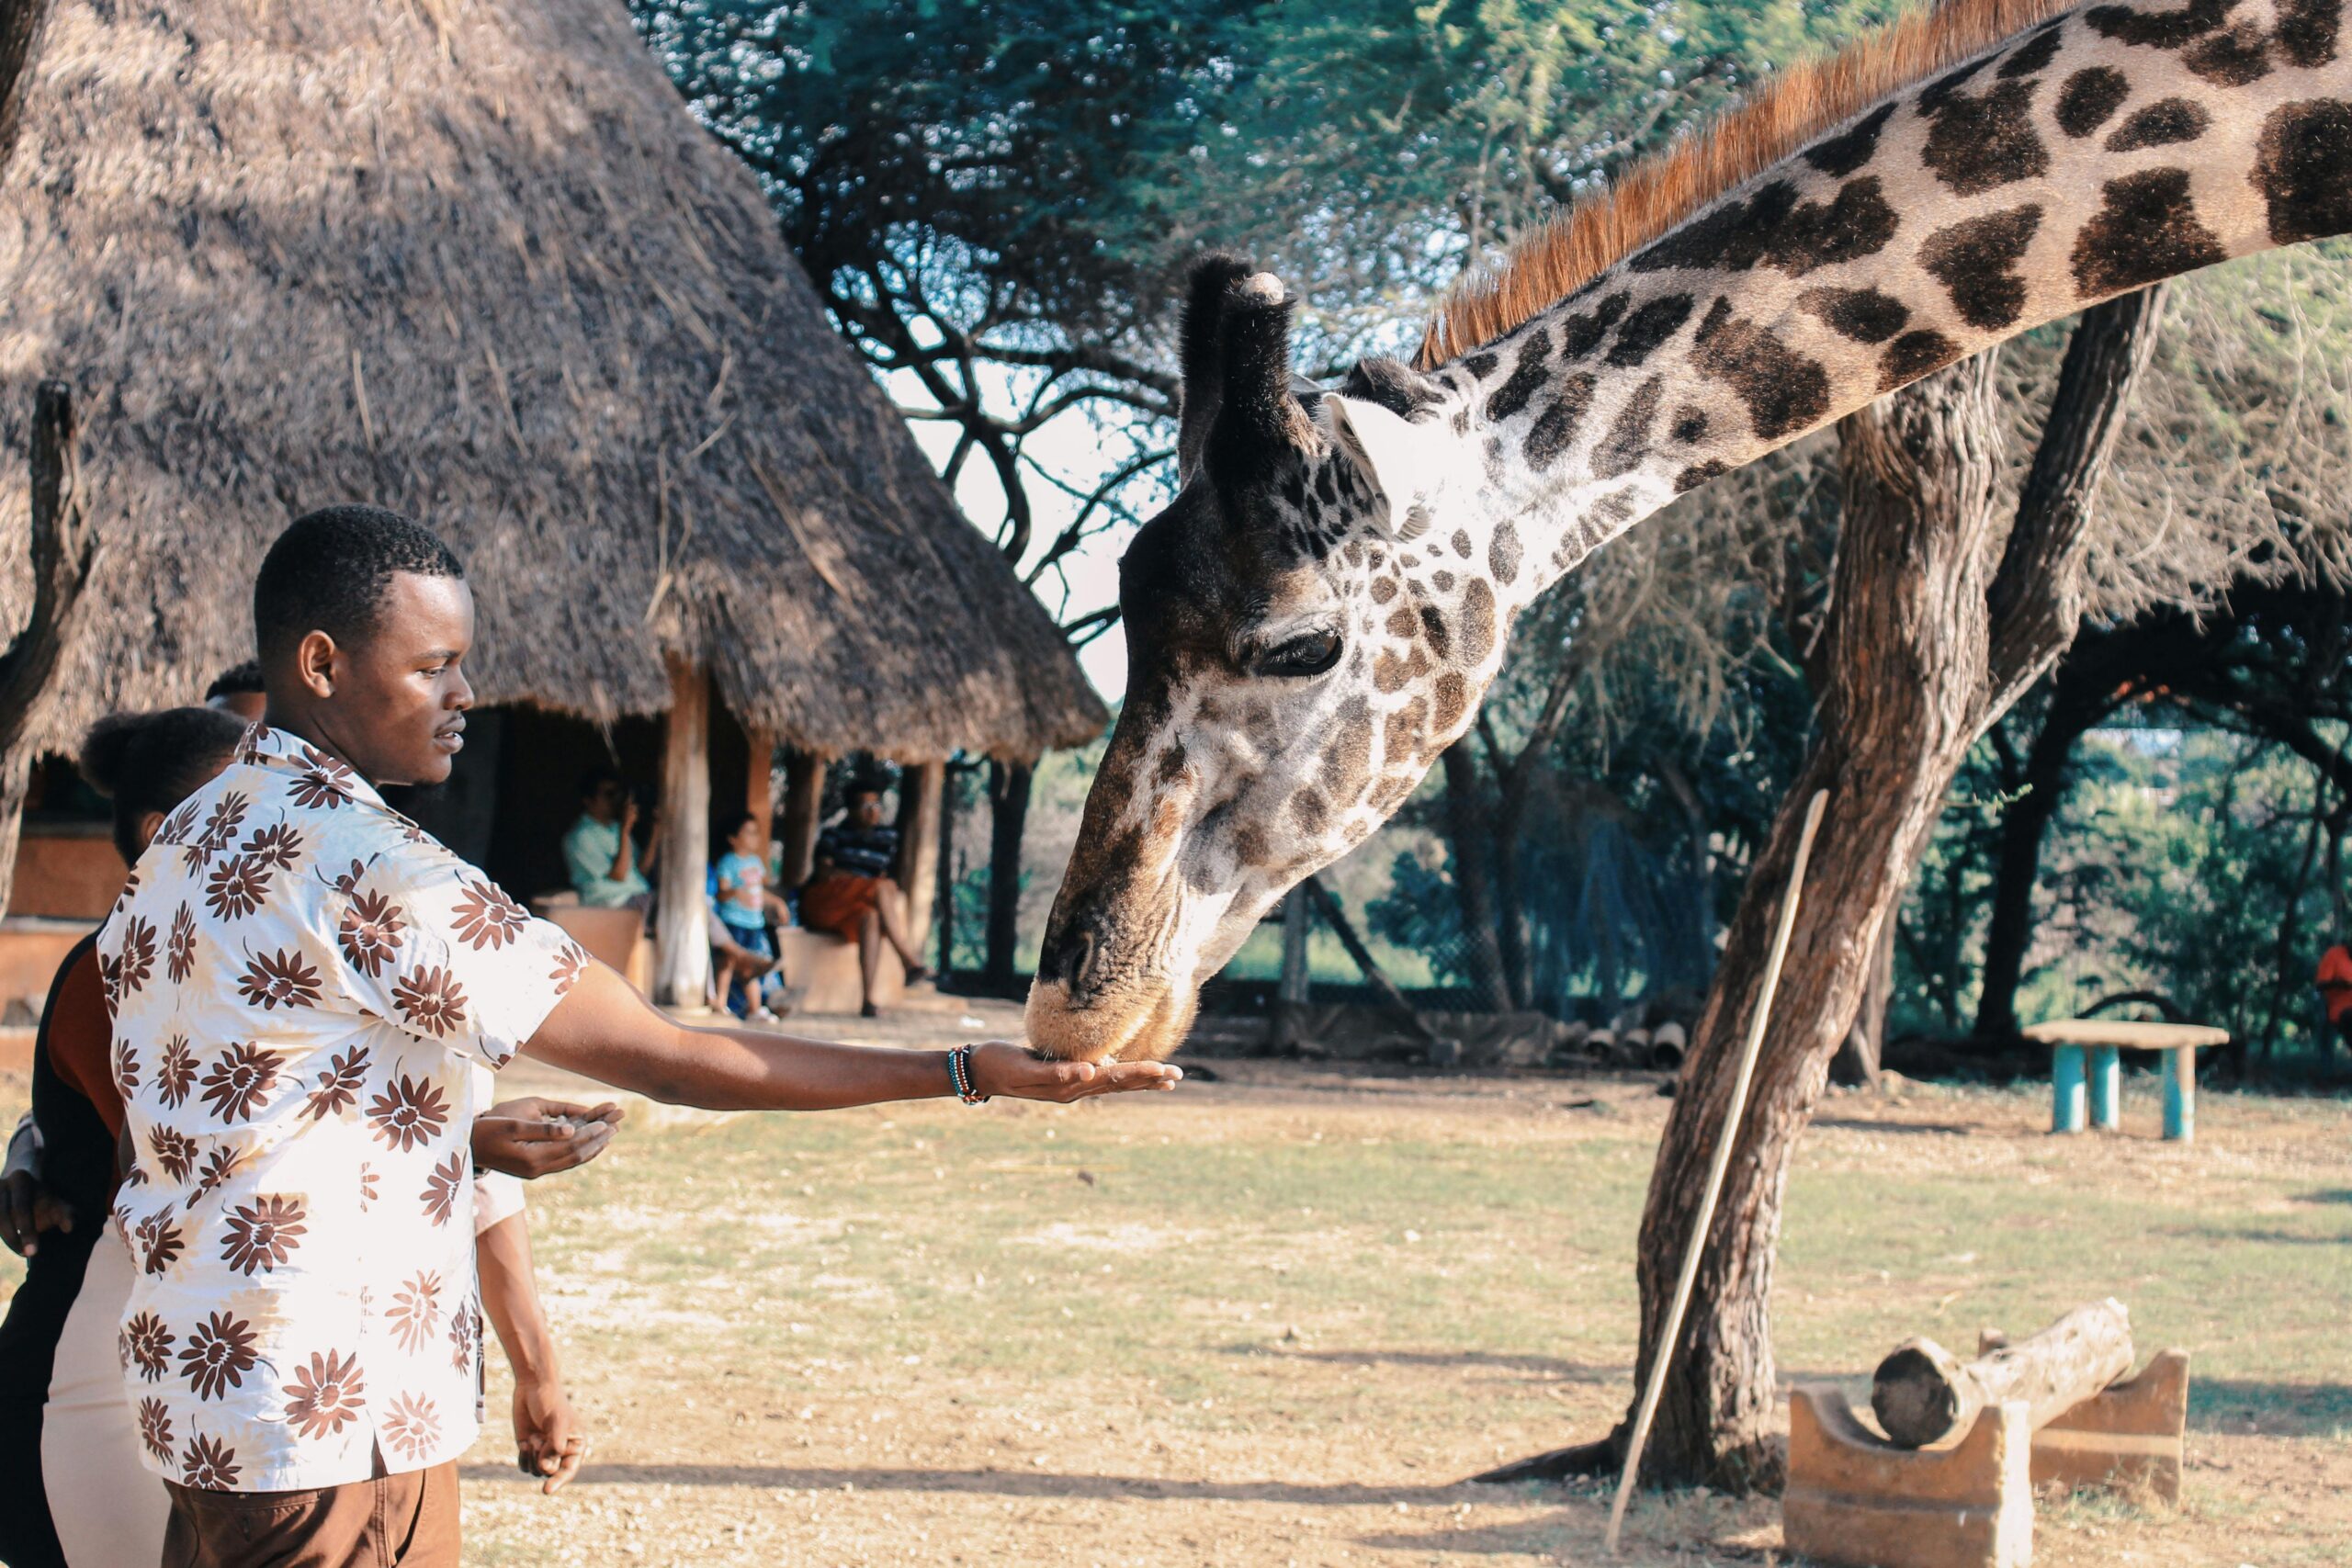 Glamping is an exciting opportunity for travelers vacationing during the best time to visit Kenya. 
pictured: a Black man feeding a giraffe